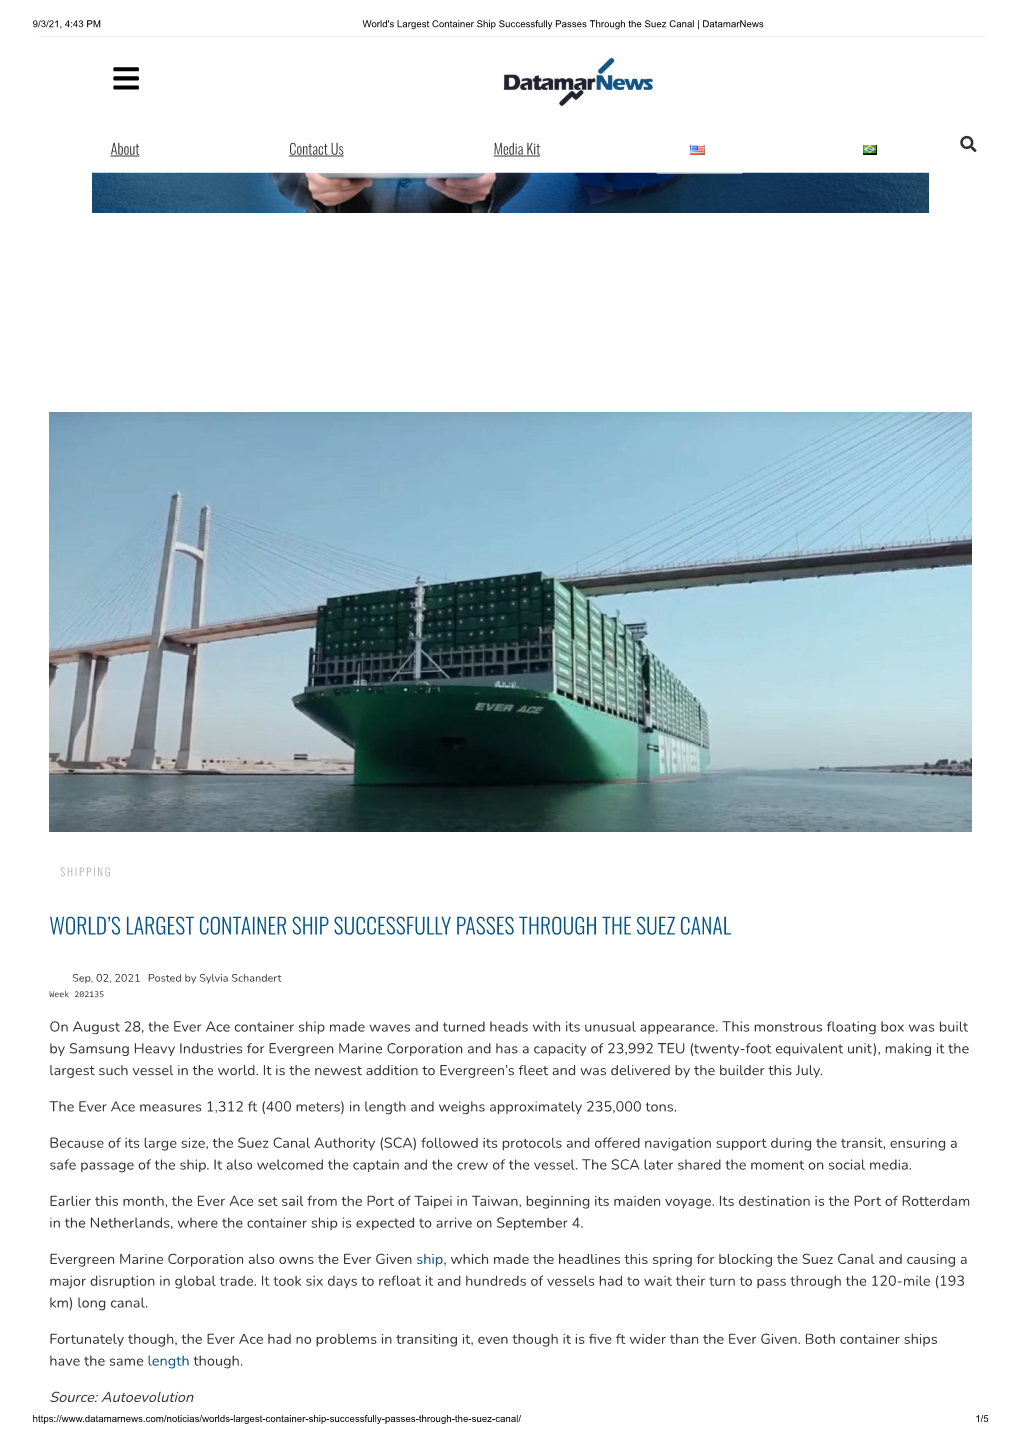 World's Largest Container Ship Successfully Passes Through the Suez Canal | Datamarnews